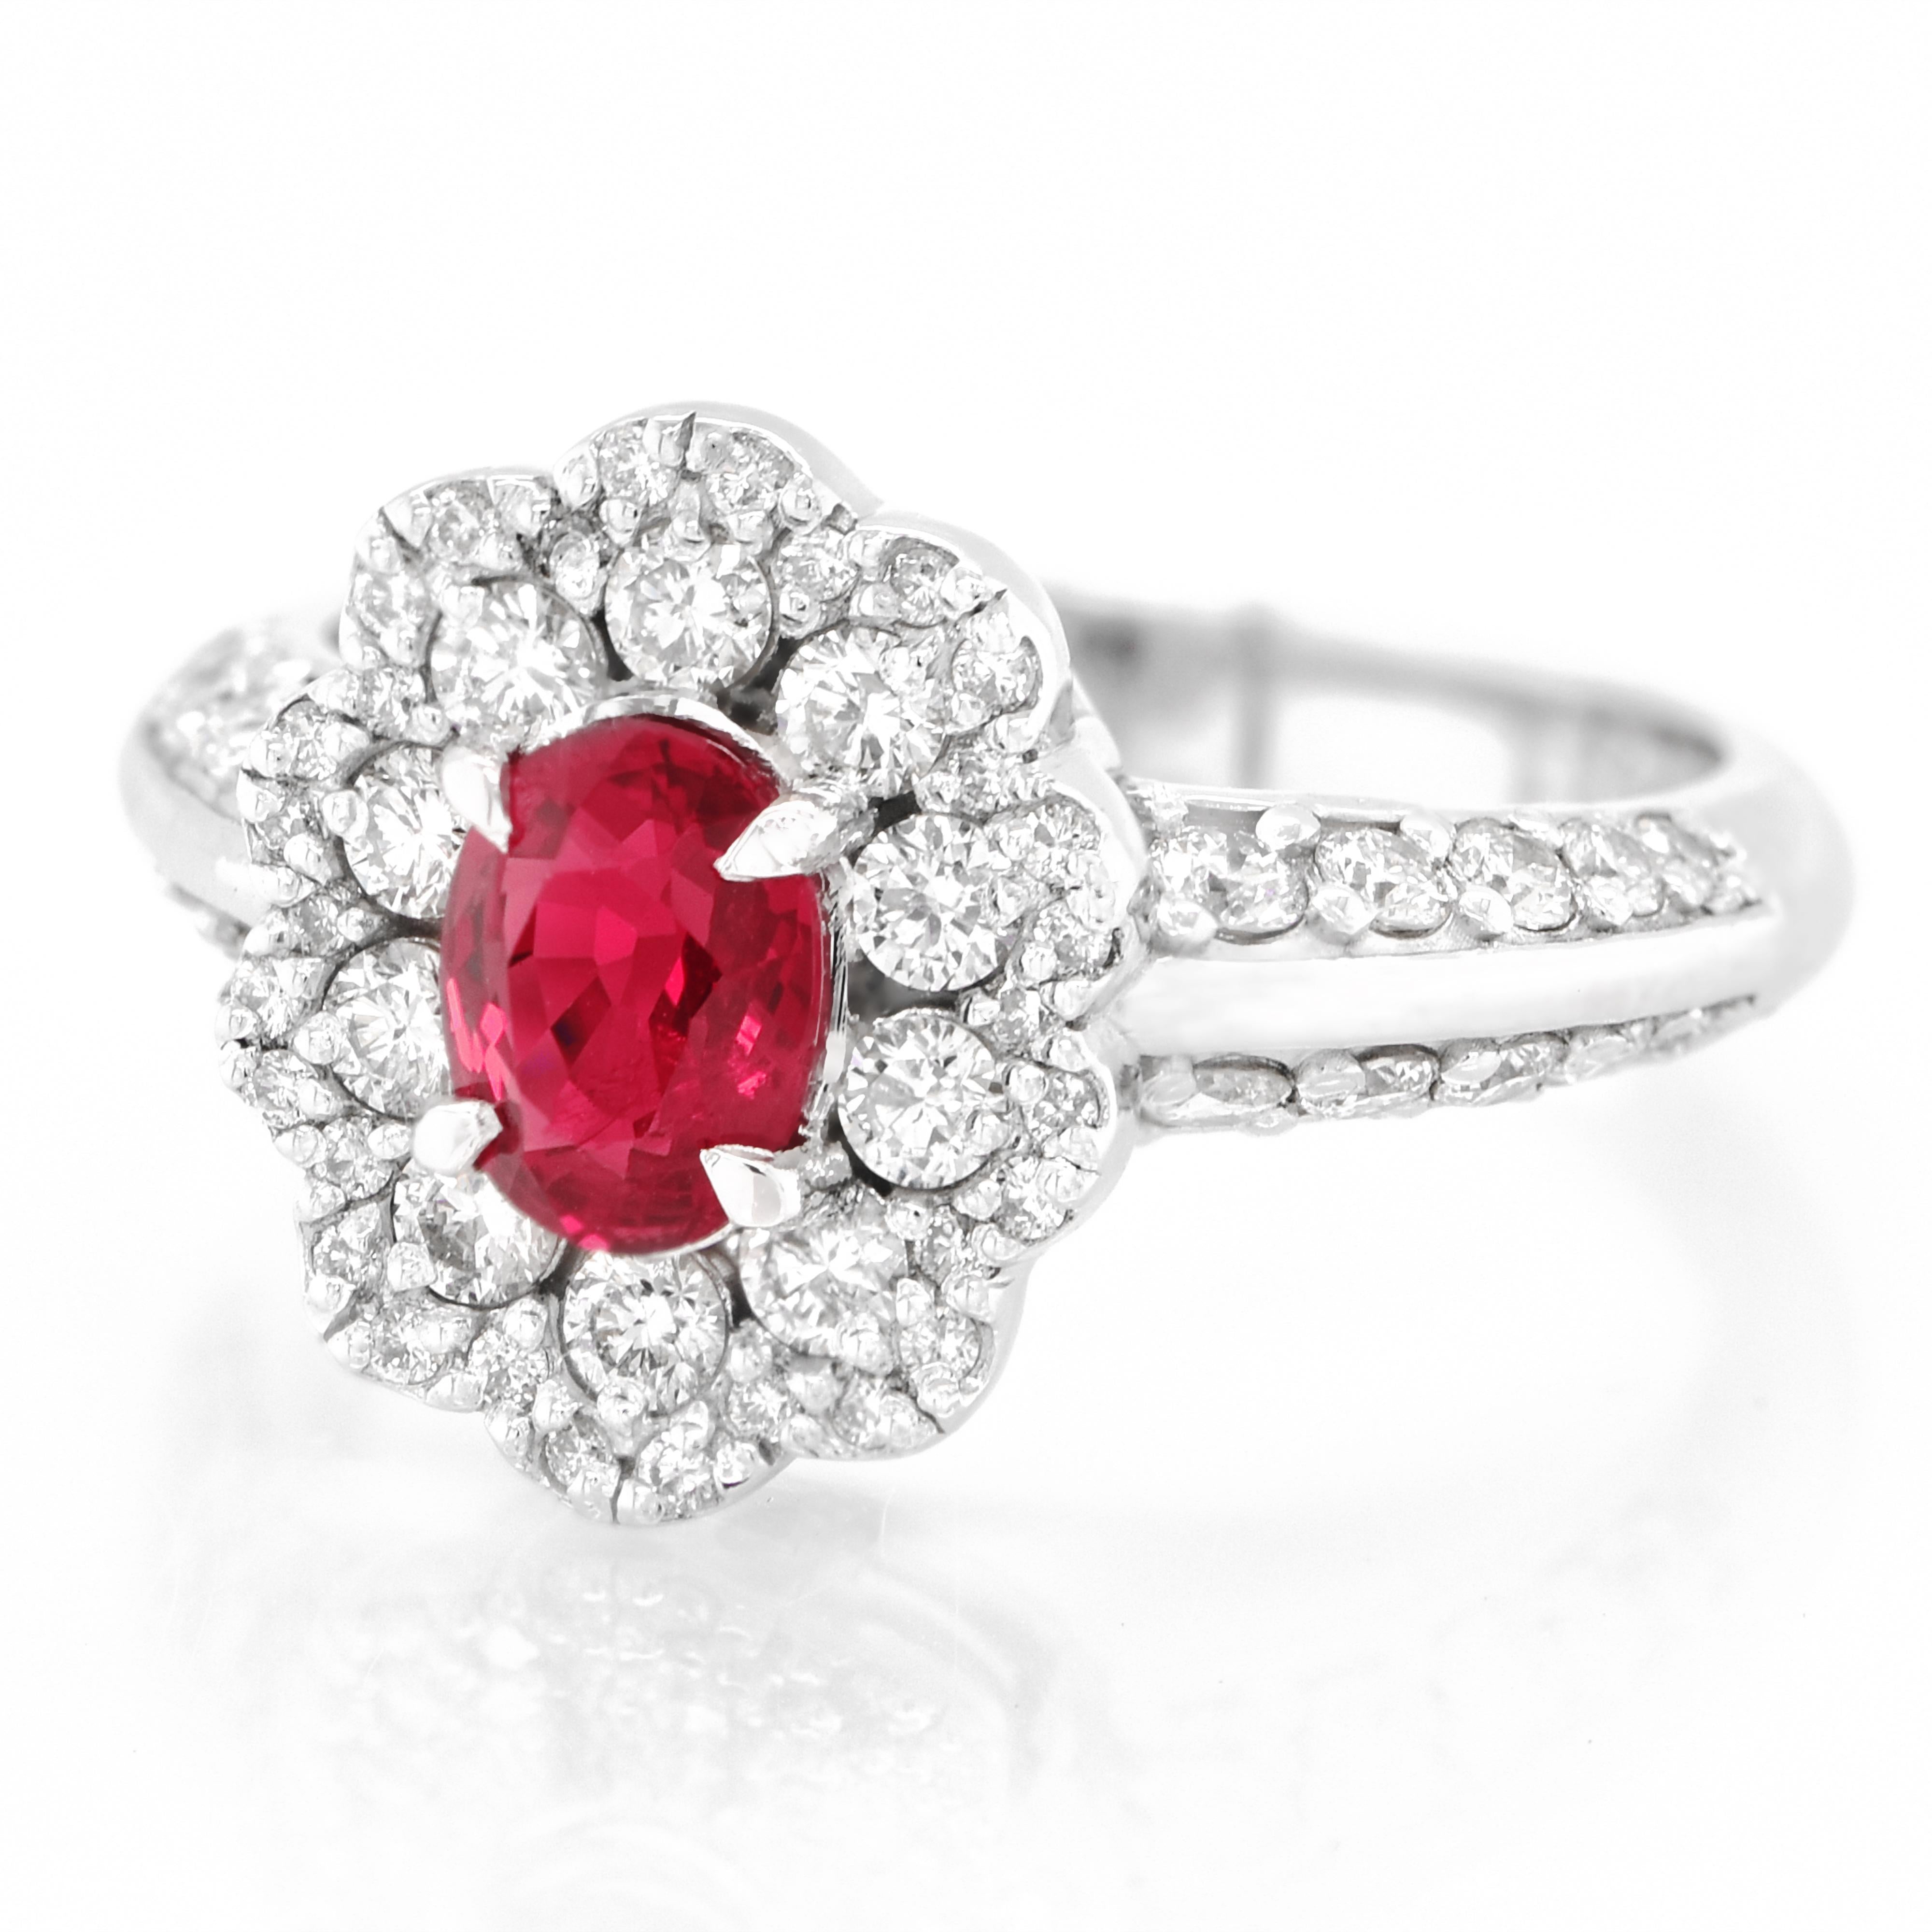 A beautiful ring set in Platinum featuring GIA Certified 0.92 Carat Natural Thailand Ruby and 0.85 Carat Diamonds. Rubies are referred to as 